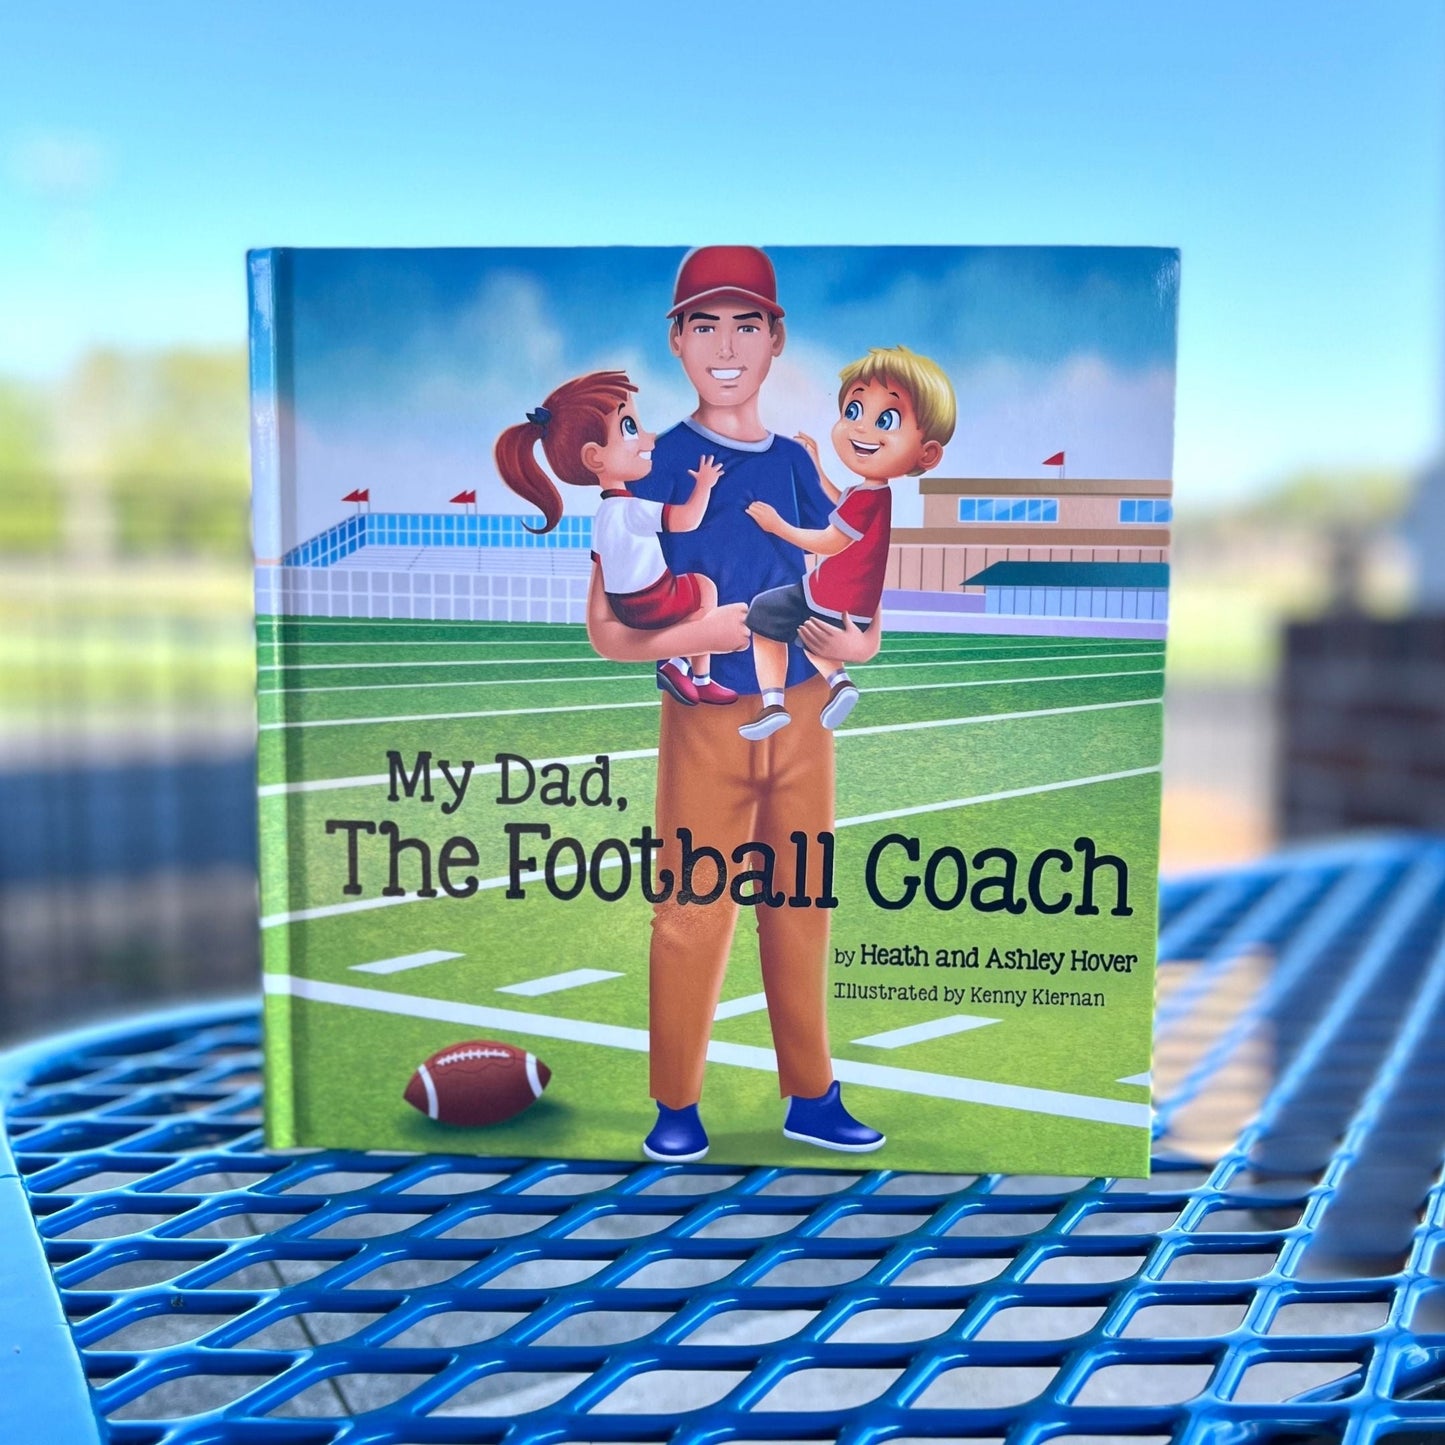 Football Coach’s Kid Book Bundle: 1 Children’s Book and 2 Coloring Books